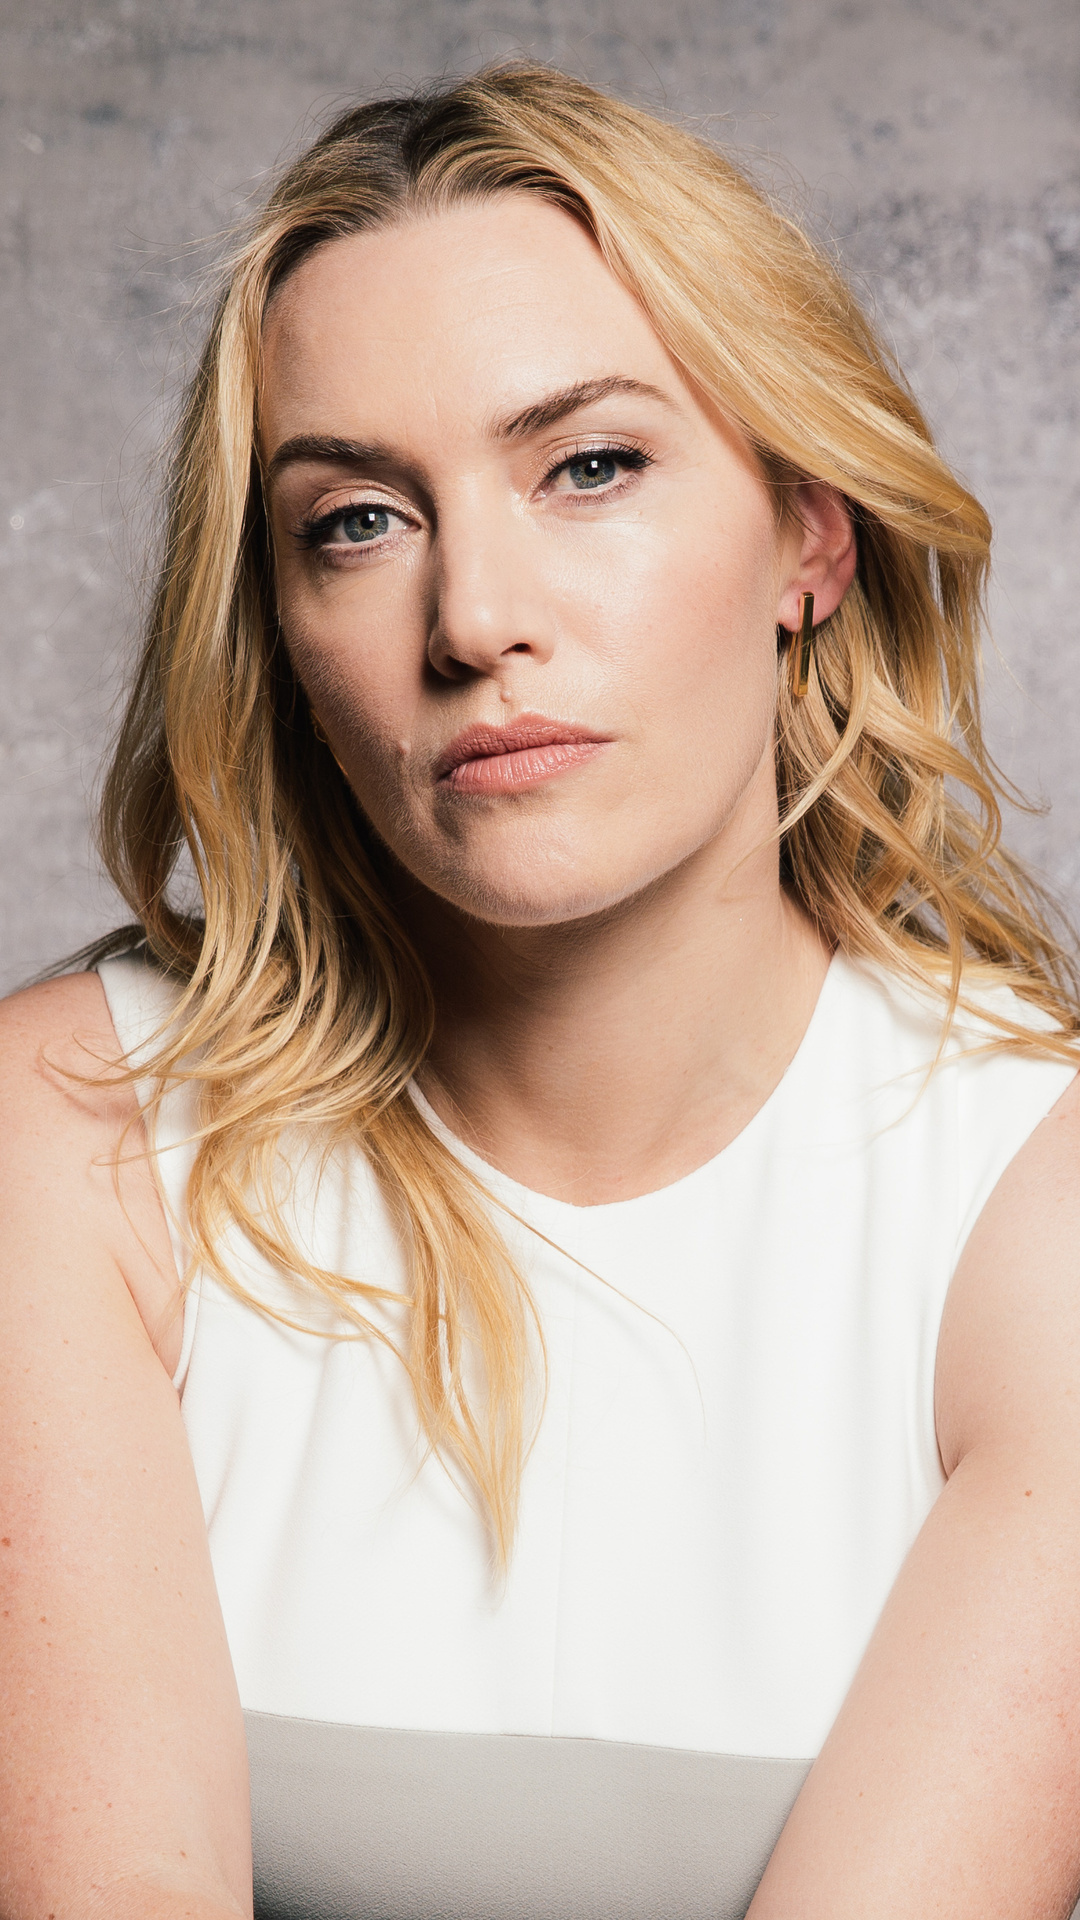 Kate Winslet, 2019 4K wallpapers, iPhone and Android, Hollywood actress, 1080x1920 Full HD Handy